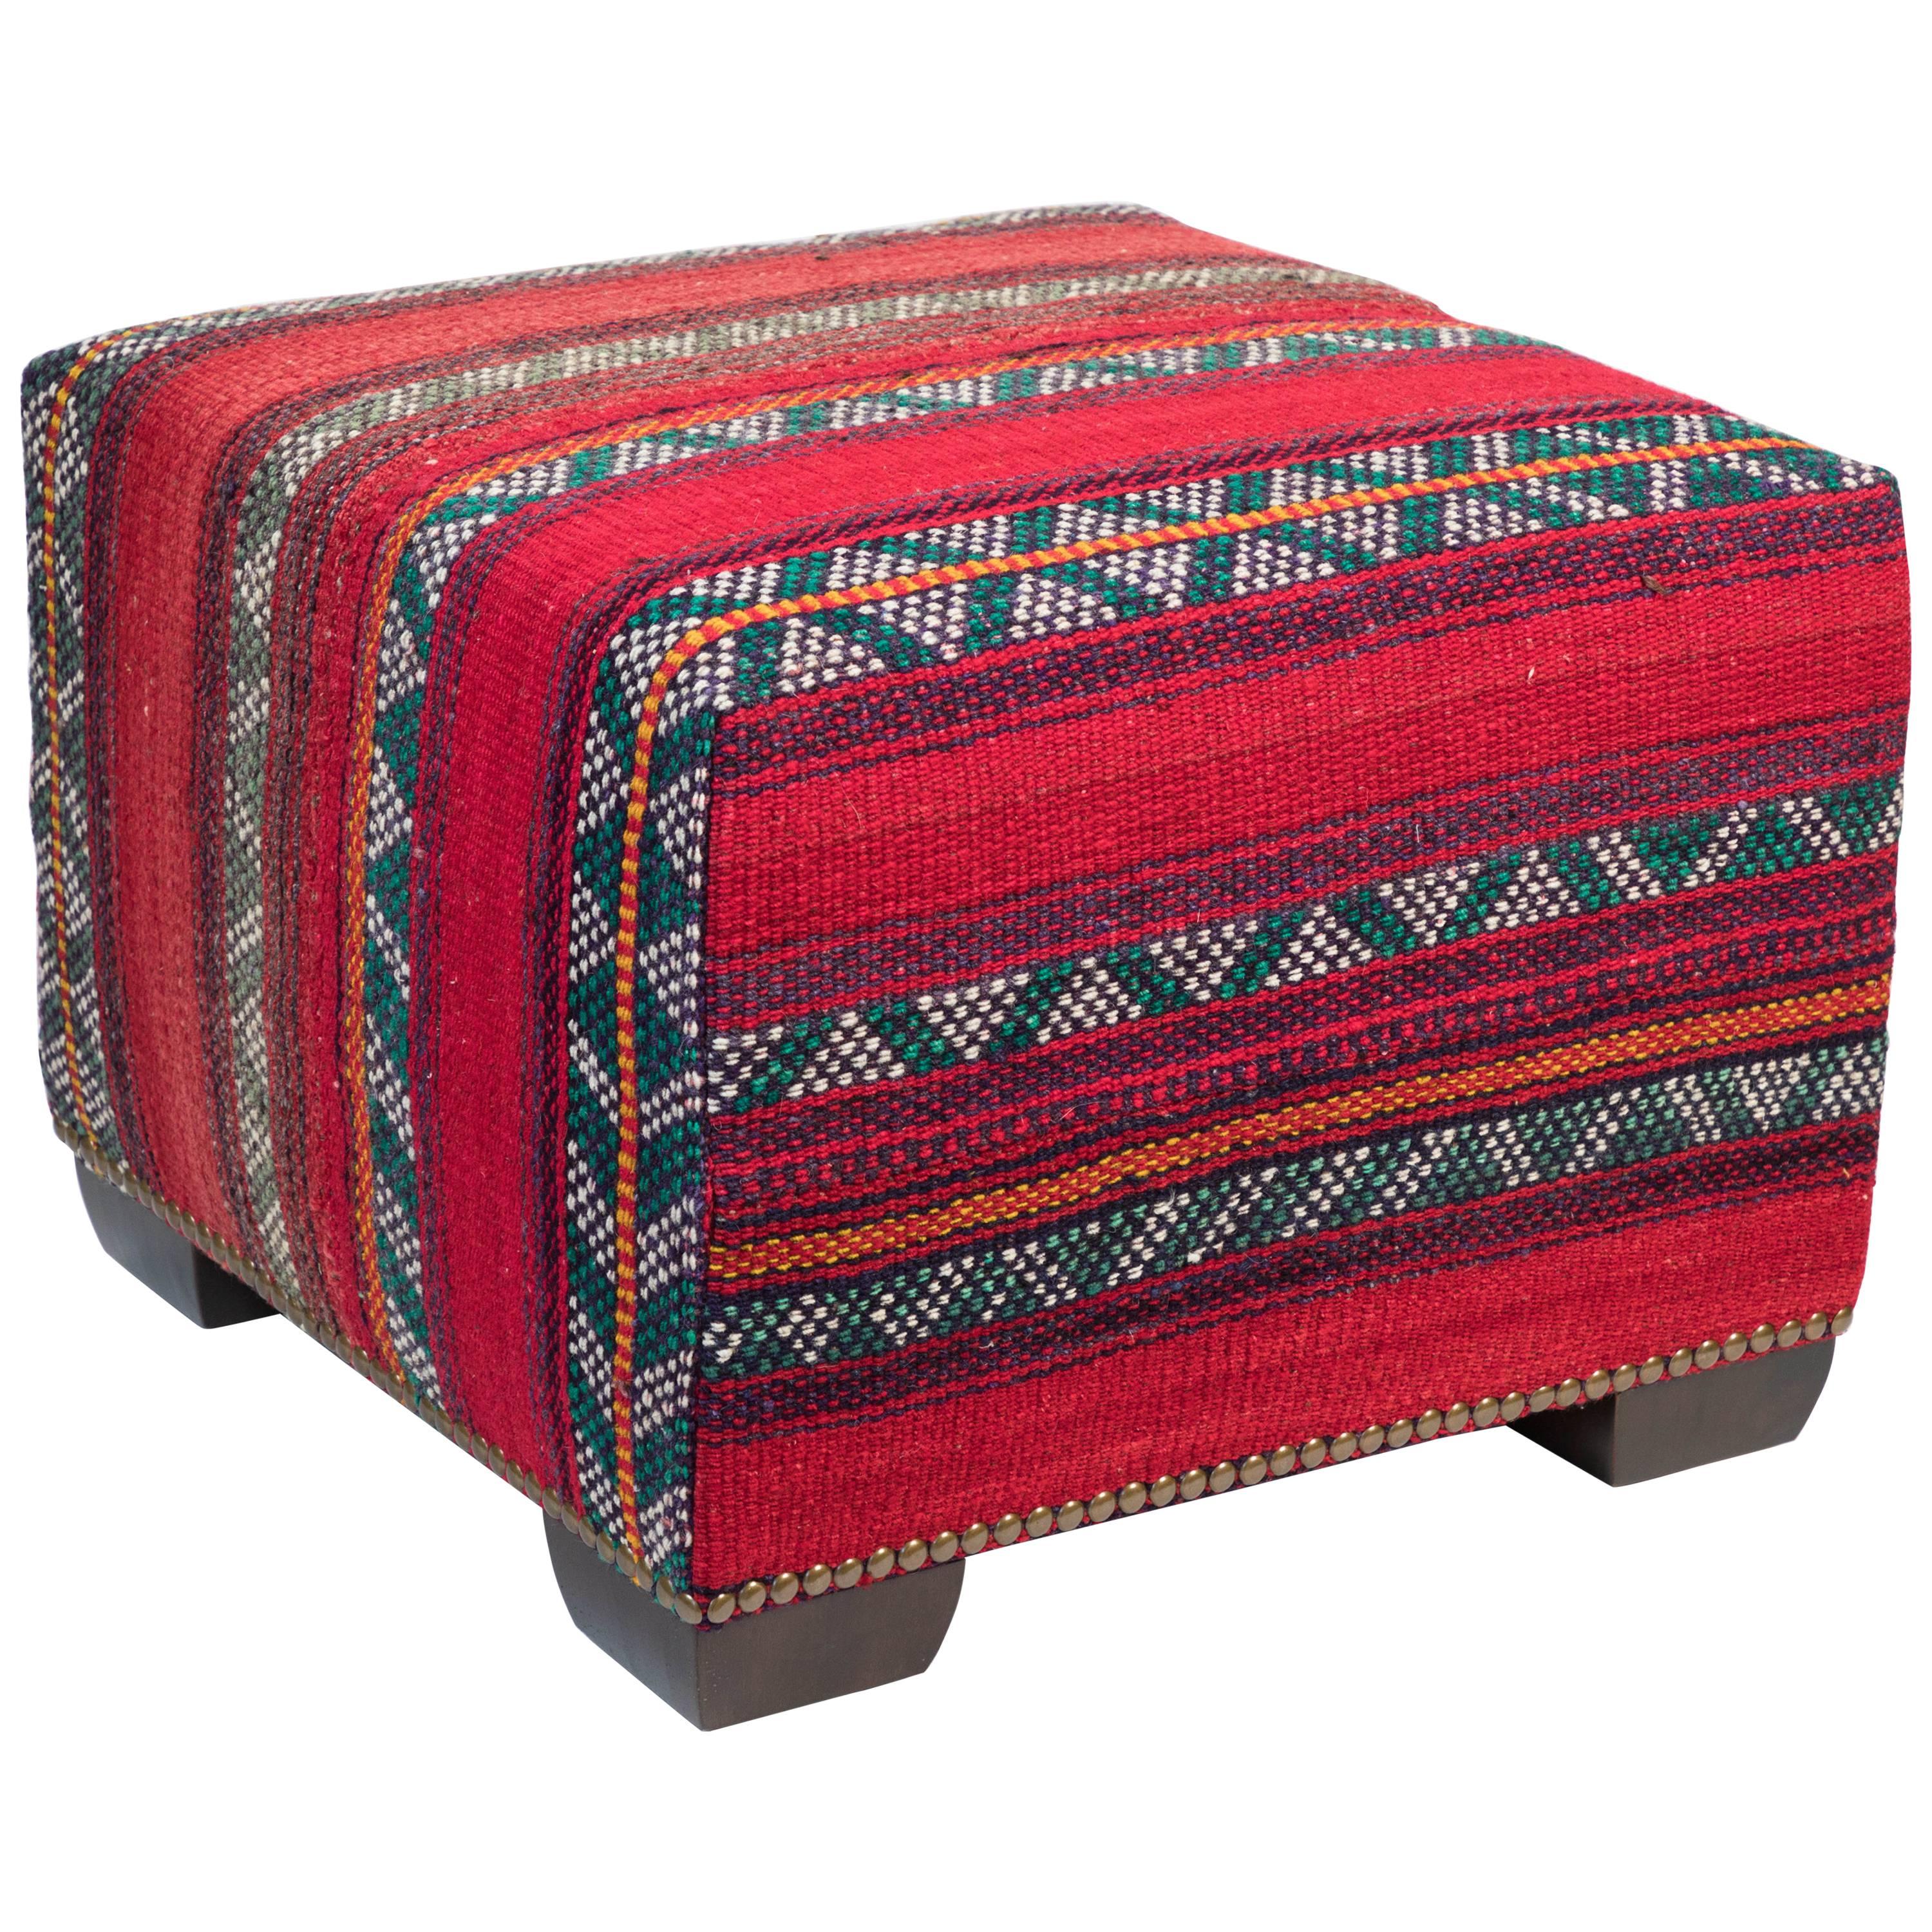 Custom-Made Ottoman in Vintage Wool East African Tent Panel